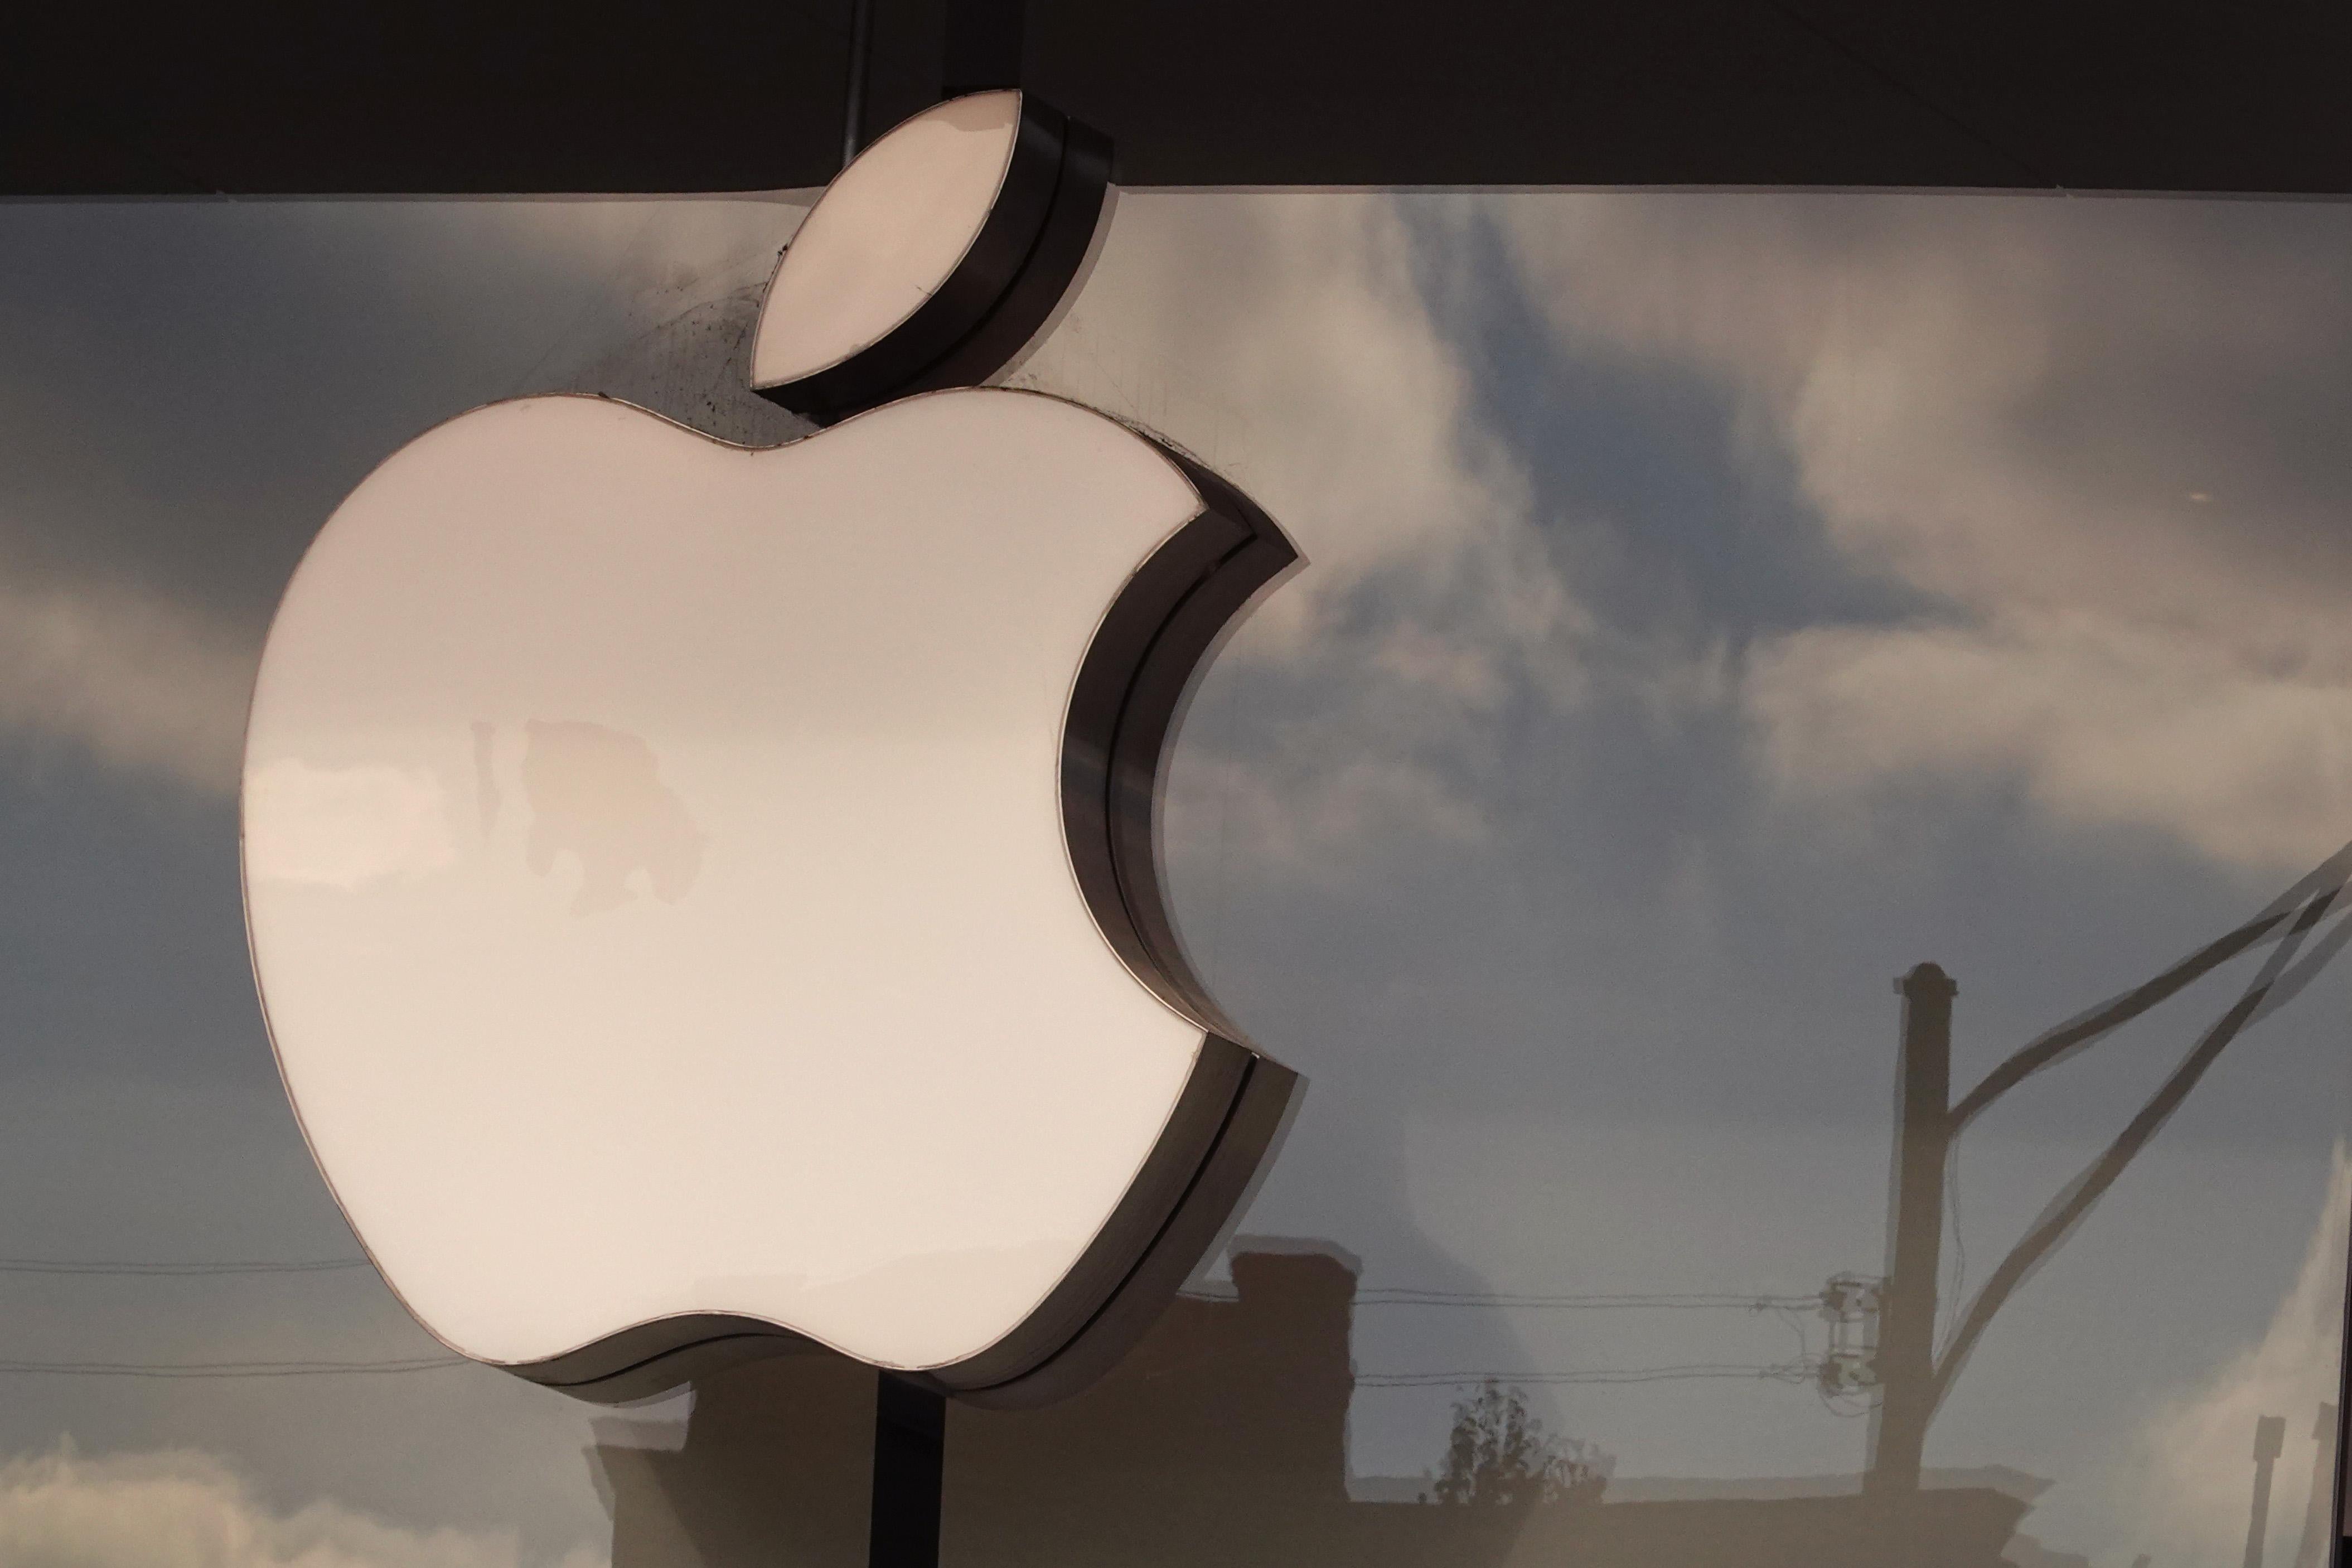 CHICAGO, ILLINOIS - NOVEMBER 28: The Apple company logo hangs above an Apple retail store on November 28, 2022 in Chicago, Illinois. Apple is currently facing shortages in iPhone supplies due to COVID-19 restrictions in China and unrest at one of Apple's major Chinese suppliers.  (Photo by Scott Olson/Getty Images)